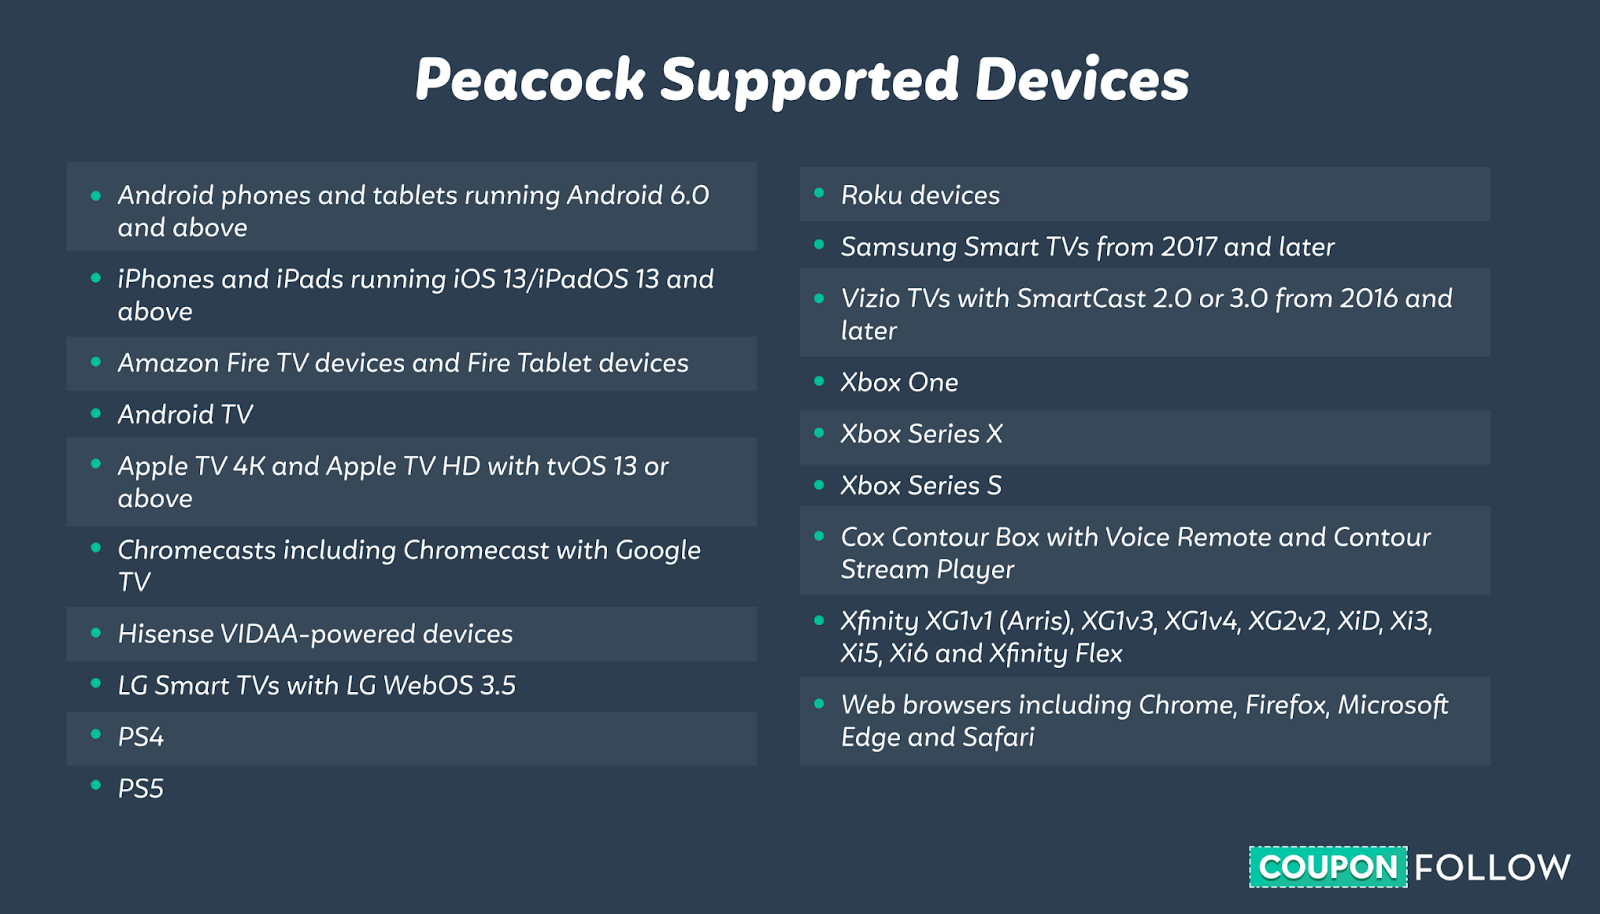 table showing the different devices that support peacock streaming service